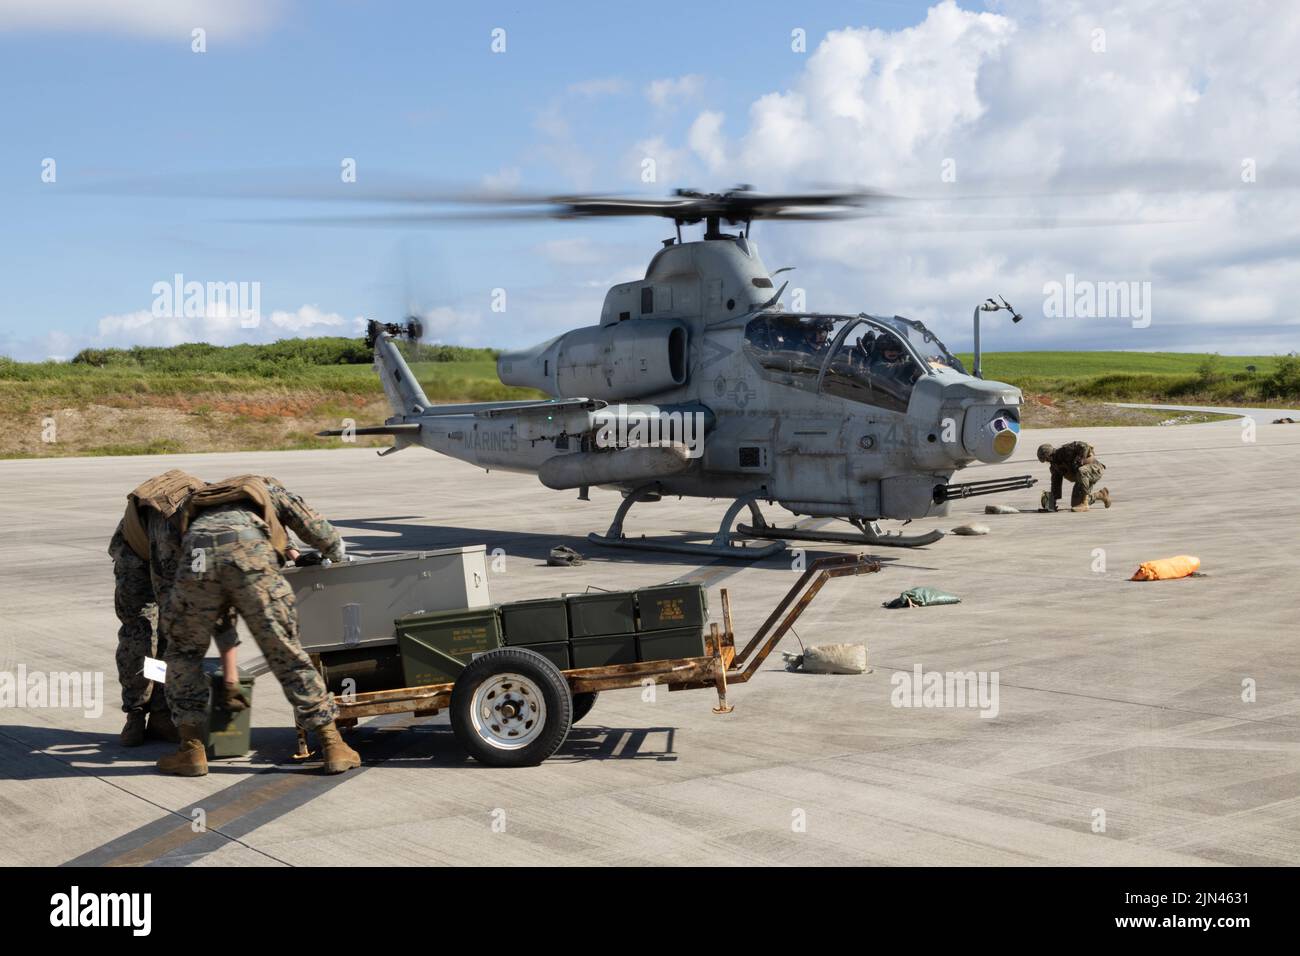 U.S. Marines with Marine Medium Tiltrotor Squadron 262 (Rein.), 31st Marine Expeditionary Unit, prepare to load ordnance into an AH-1W Super Cobra during a forward arming and refueling point exercise on Ie Shima, Okinawa, Japan, Aug. 04, 2022 A FARP is a point of operation used for fueling and rearming an aircraft outside of a forward operating base. The 31st MEU is operating aboard ships of the Tripoli Amphibious Ready Group in the 7th Fleet area of operations to enhance interoperability with allies and partners and serve as a ready response force to defend peace and stability in the Indo-Pac Stock Photo